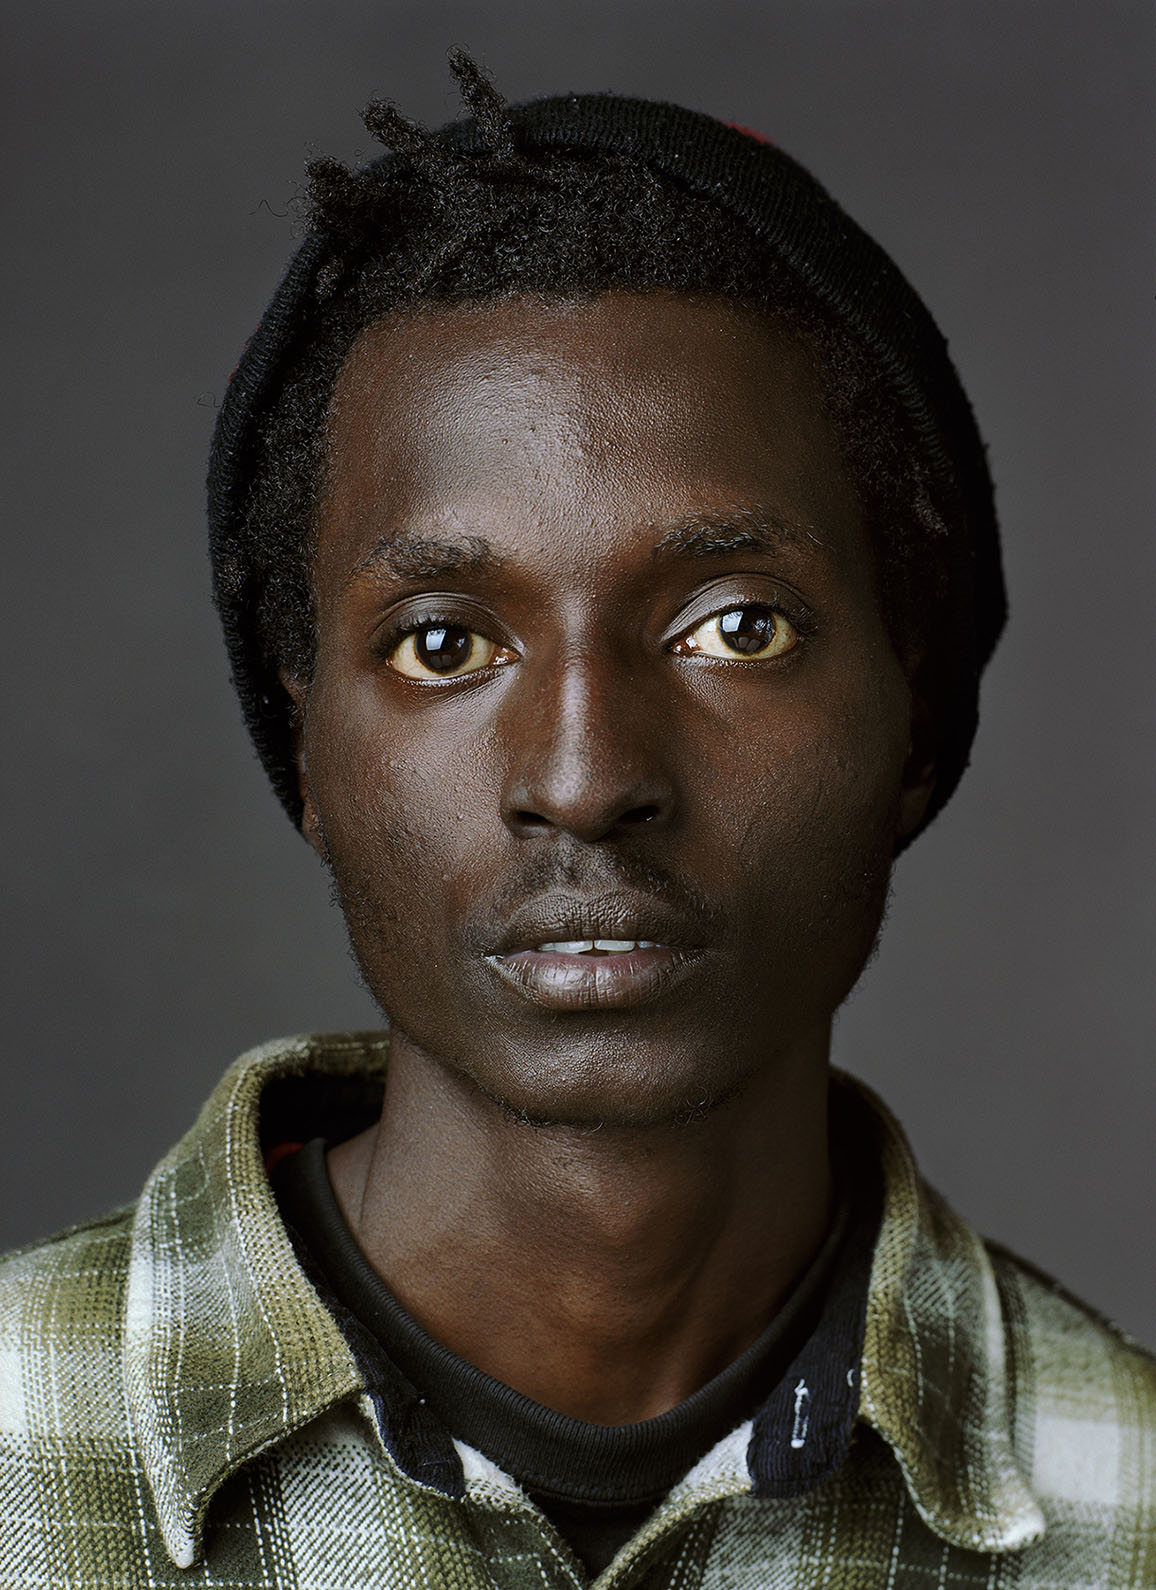 USA. "Down and Out in the South": Studio portraits of homeless people in Atlanta (GA), Columbia (SC) and the Mississippi Delta.  Knitzer (b. Nairobi, Kenya, 1987), photographed in Atlanta GA., april 2011.